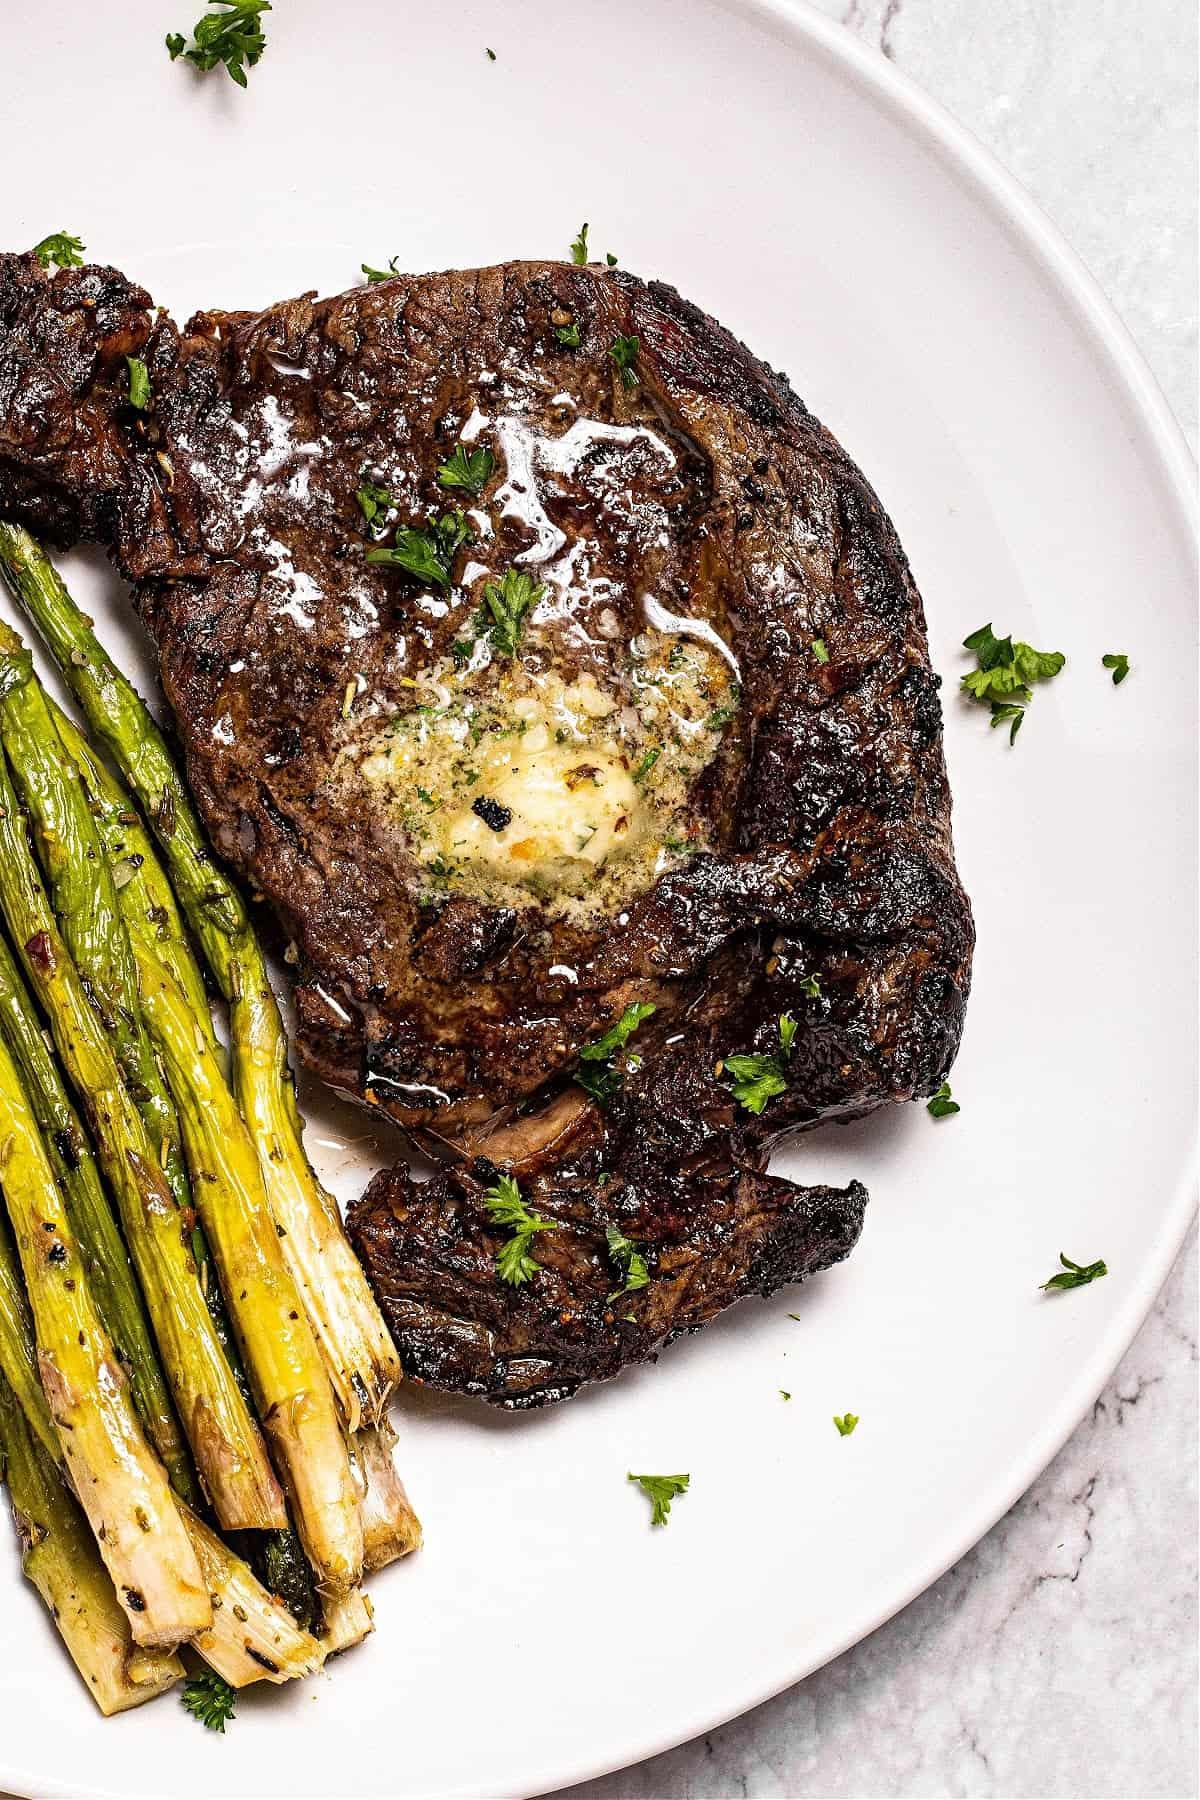 ninja air fryer steak topped with compound garlic butter on a plate with air fryer asparagus